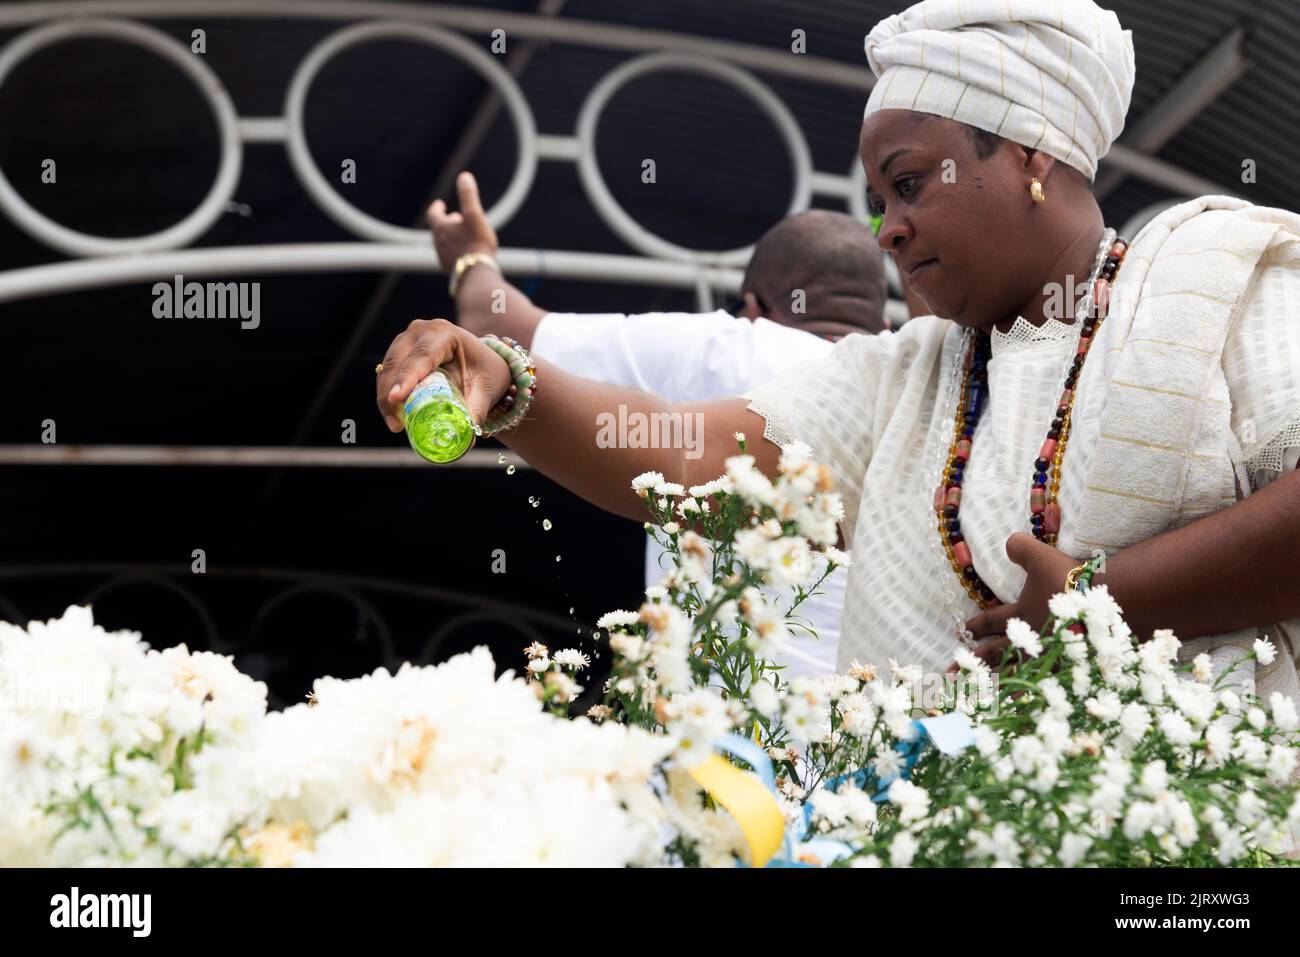 A view of Members of the Candomble religion during a religious celebration in a terreiro in the city Stock Photo